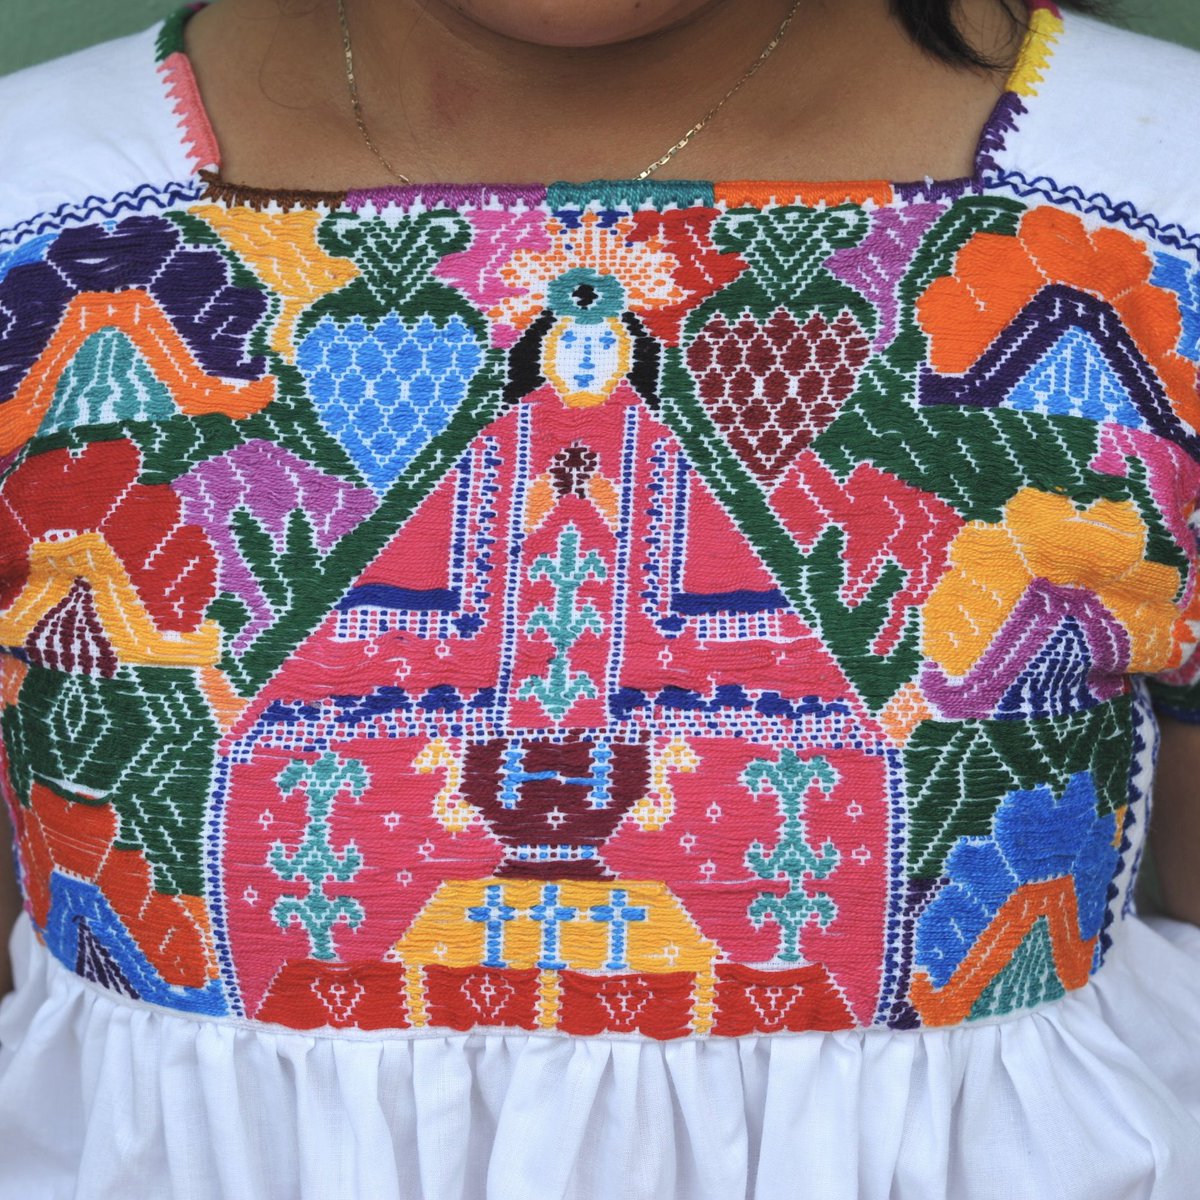 you can always rely on the west to suck every last bit of color out of indigenous cultures. anyways here’s some actual examples of regalia from nahuatl speaking communities